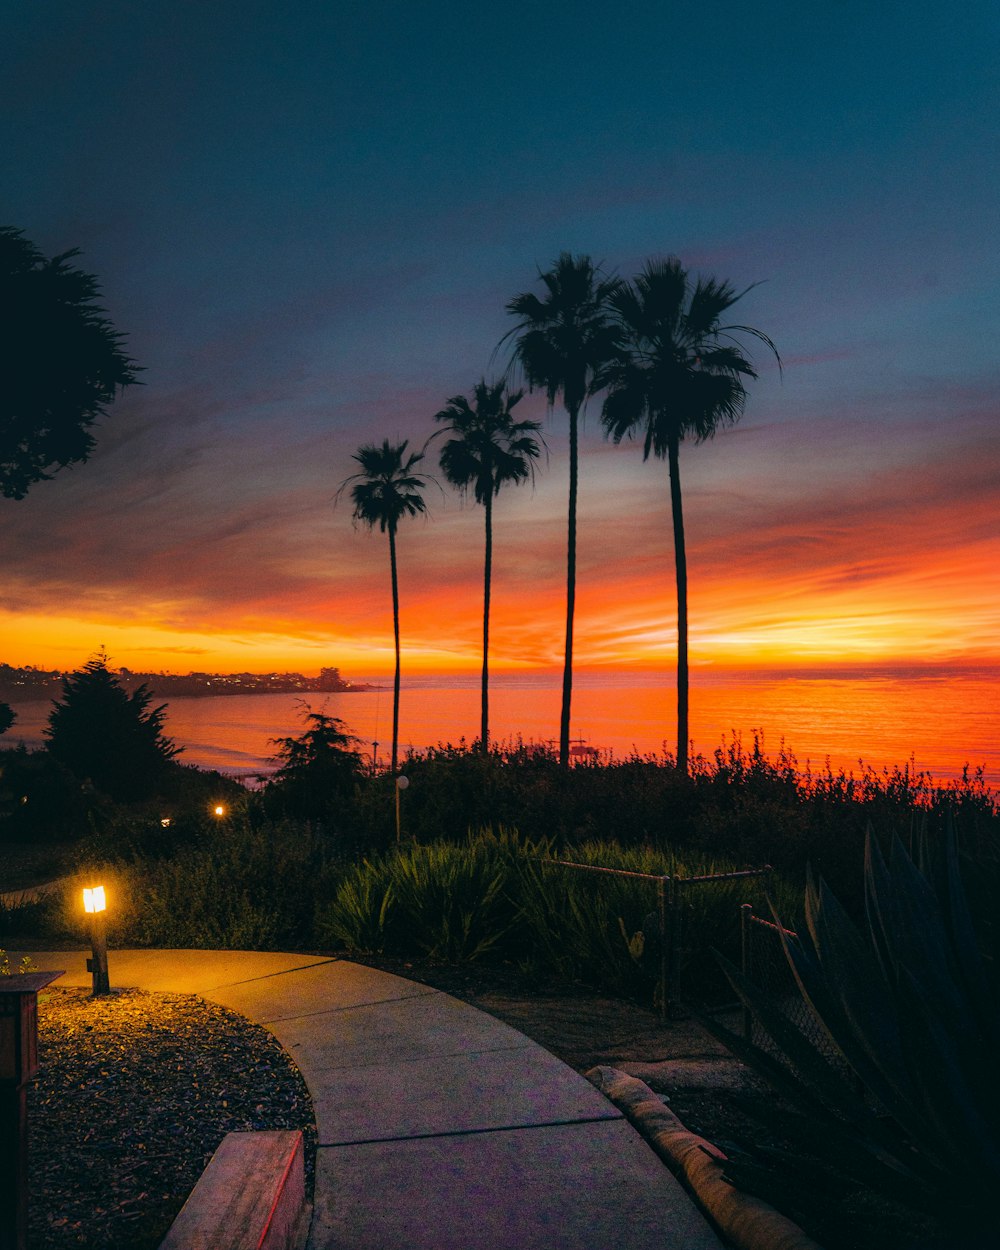 palm trees near body of water during sunset